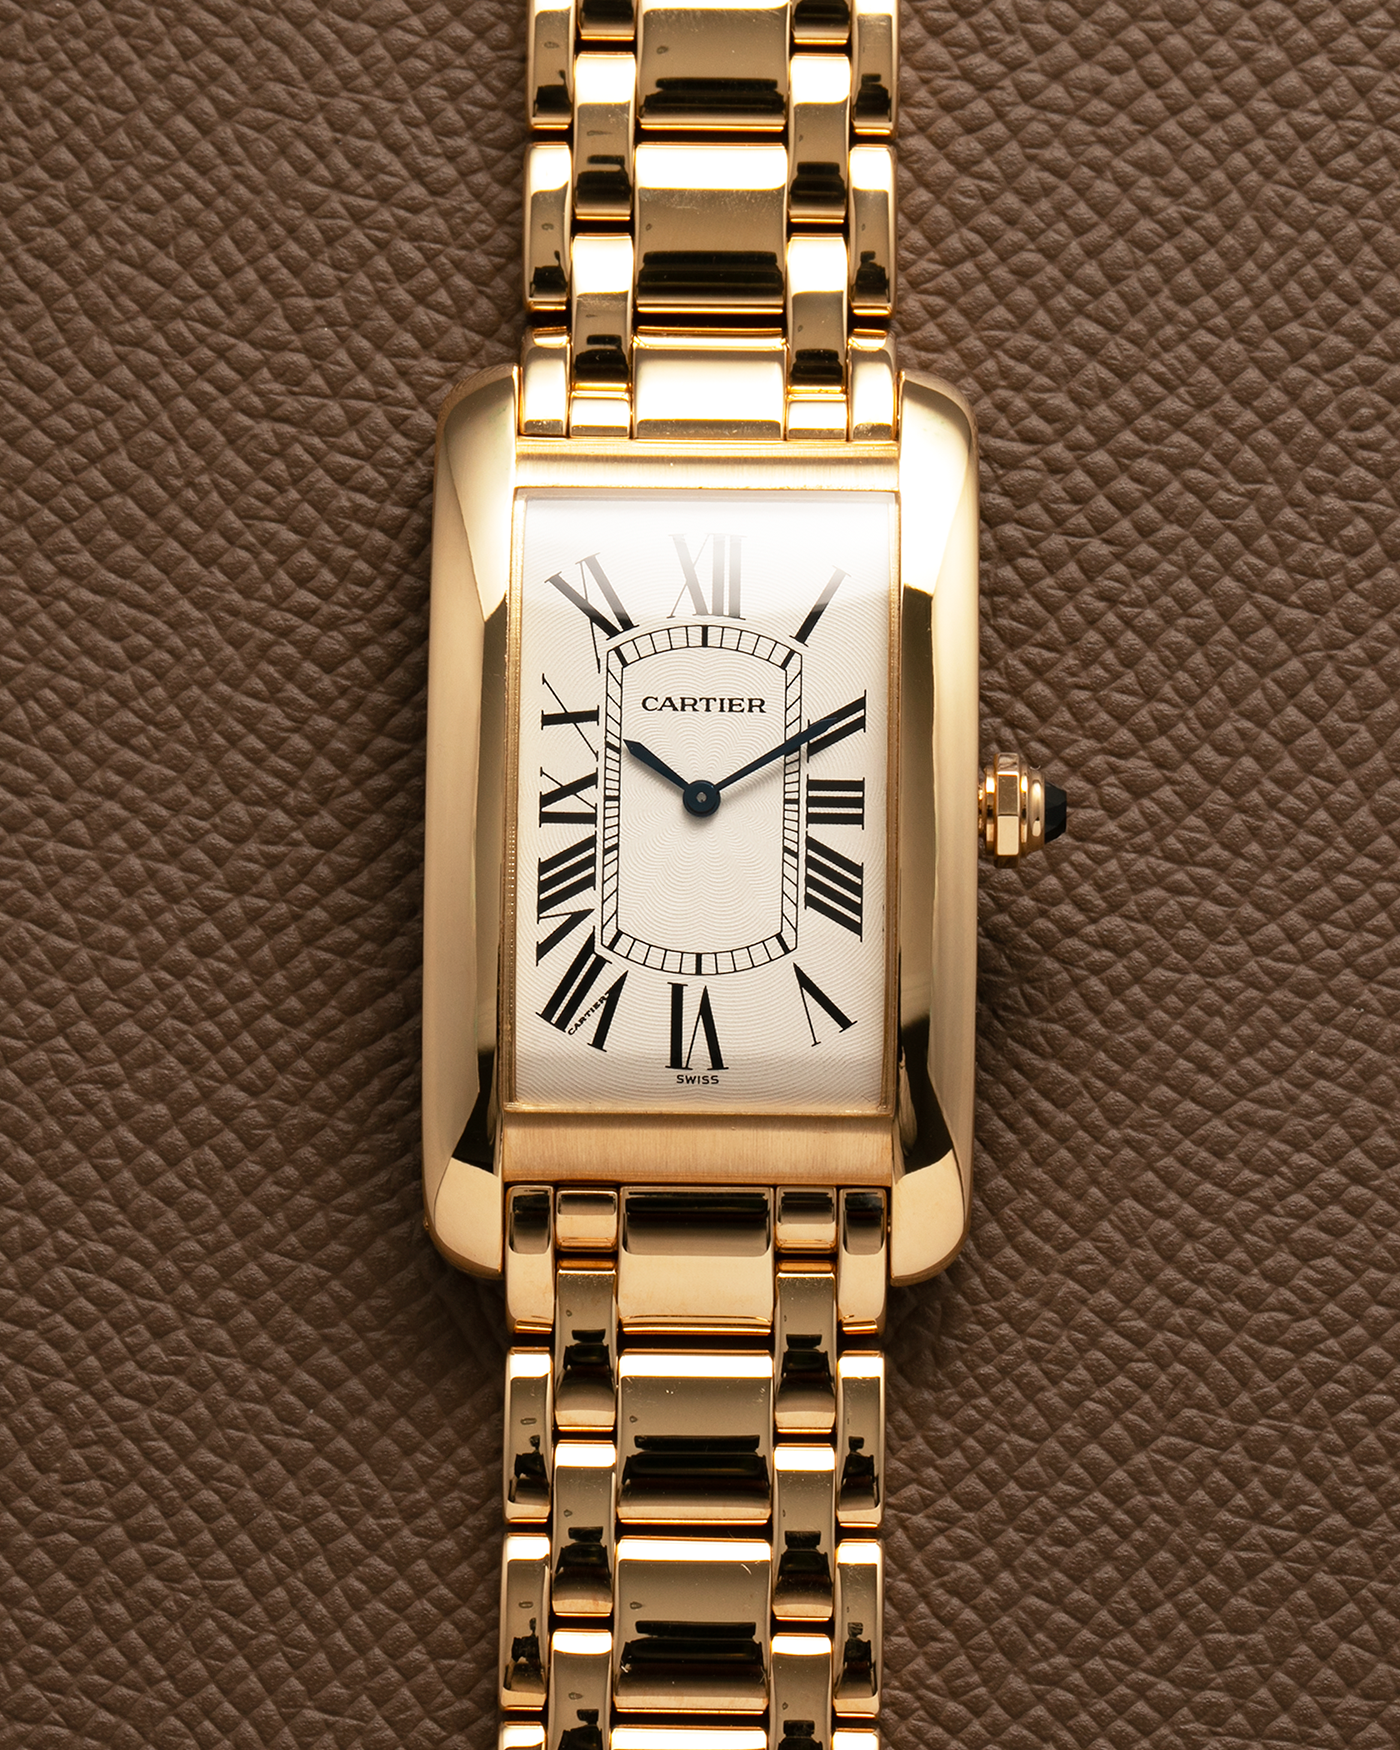 Brand: Cartier Year: 1990s Model: Tank Américaine Reference: 1735-1 Material: 18-carat Yellow Gold Movement: Cartier Cal. 430 MC (Piaget Cal. 430P based), Manual-Winding Case Dimensions: 44mm x 26mm x 7.5mm Lug Width: 18mm Bracelet: Cartier Bracelet in full 18-carat Yellow Gold with Signed Butterfly Clasp